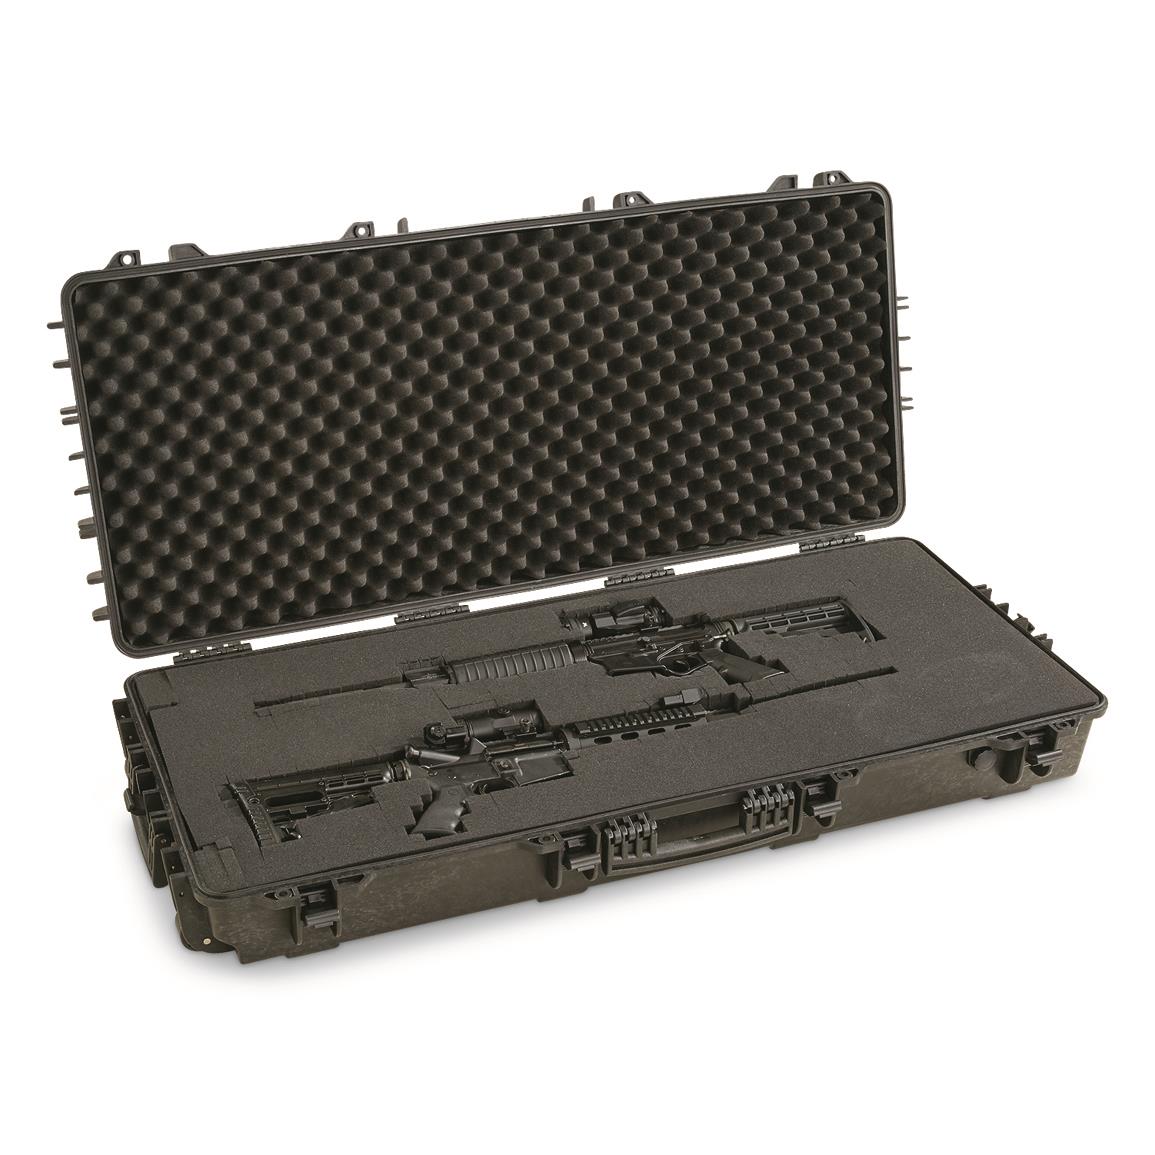 HQ ISSUE Rifle/Bow Carry Case